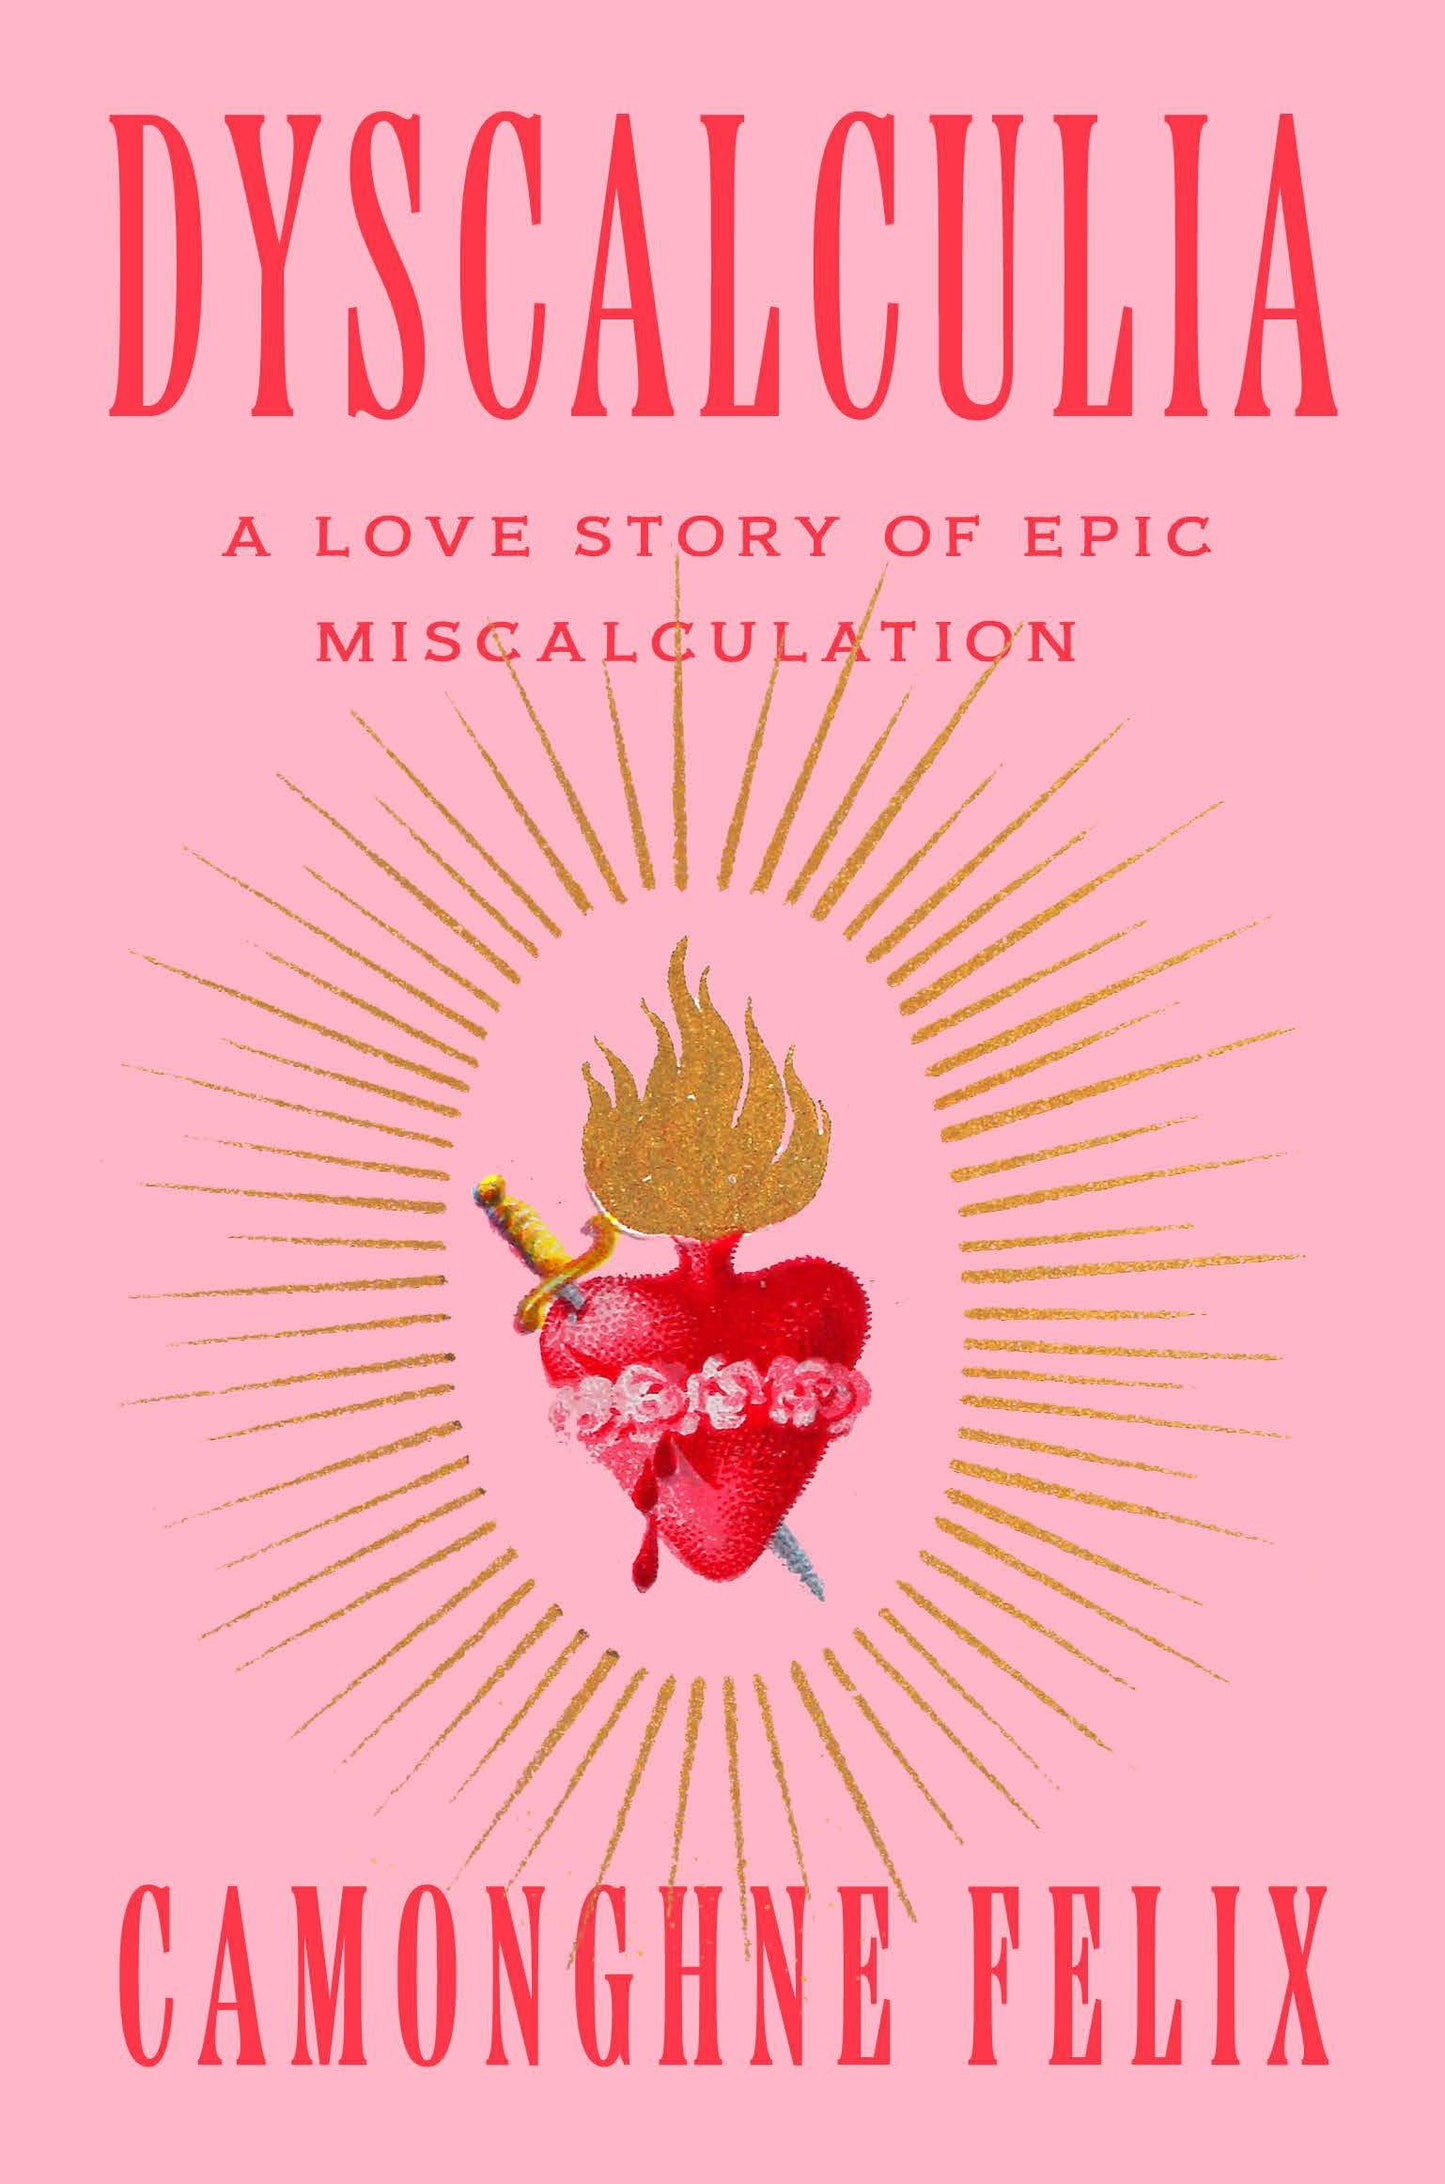 Dyscalculia // A Love Story of Epic Miscalculation